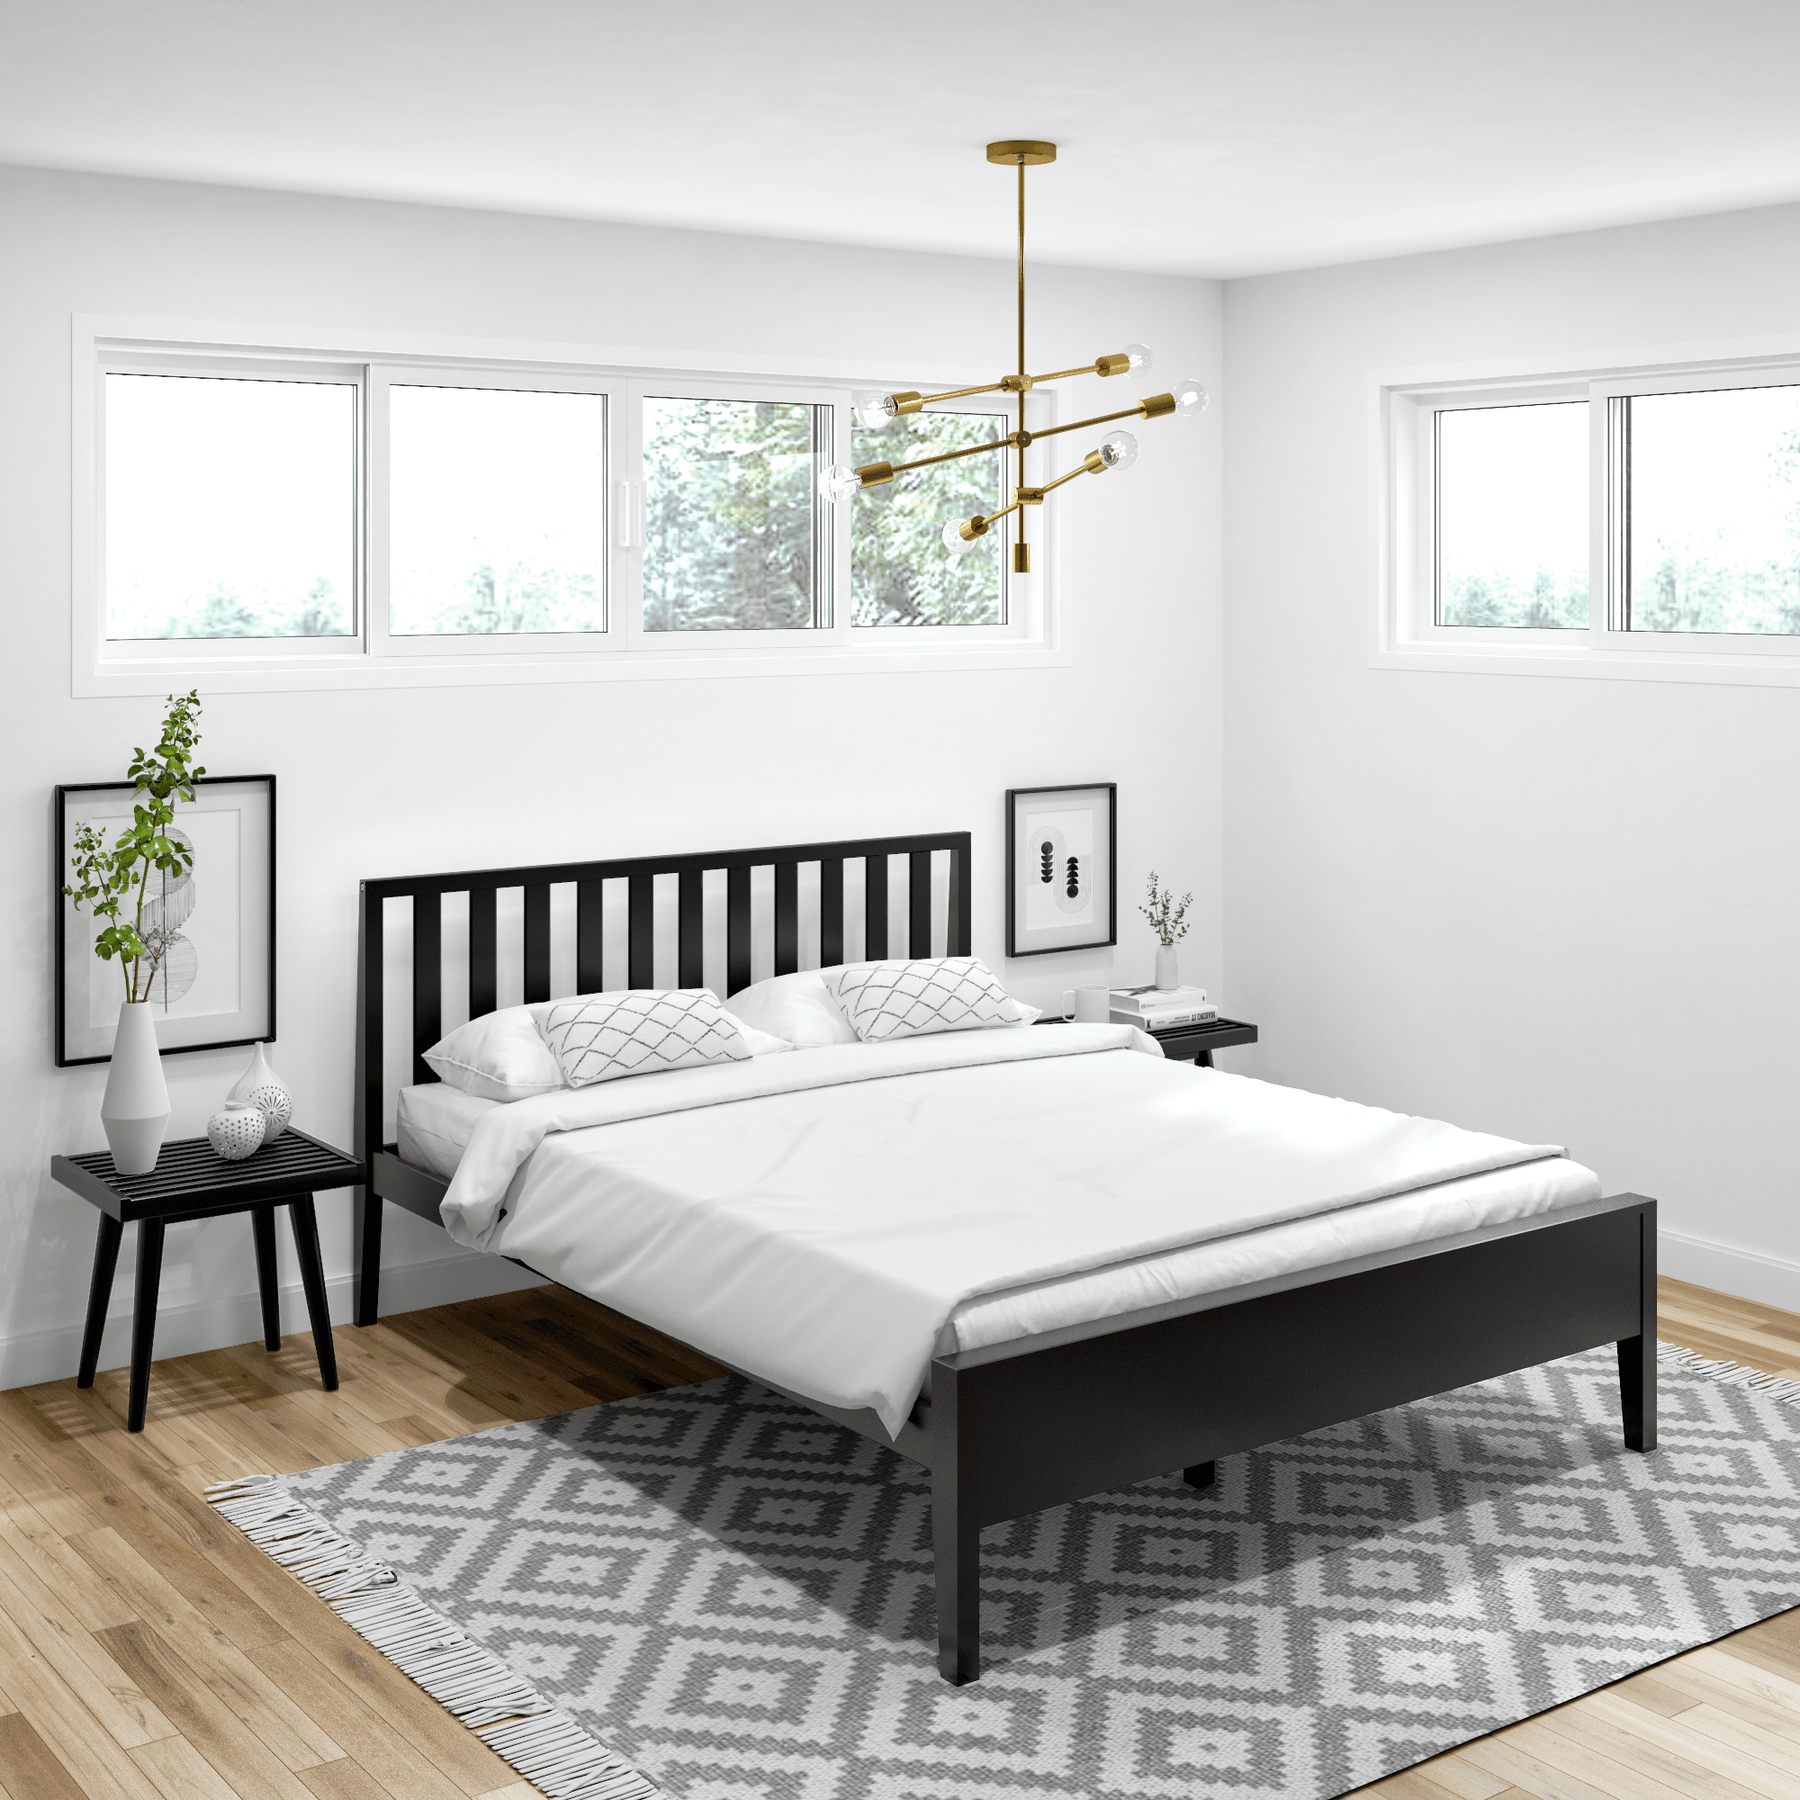 Best Modern Beds for Small Spaces